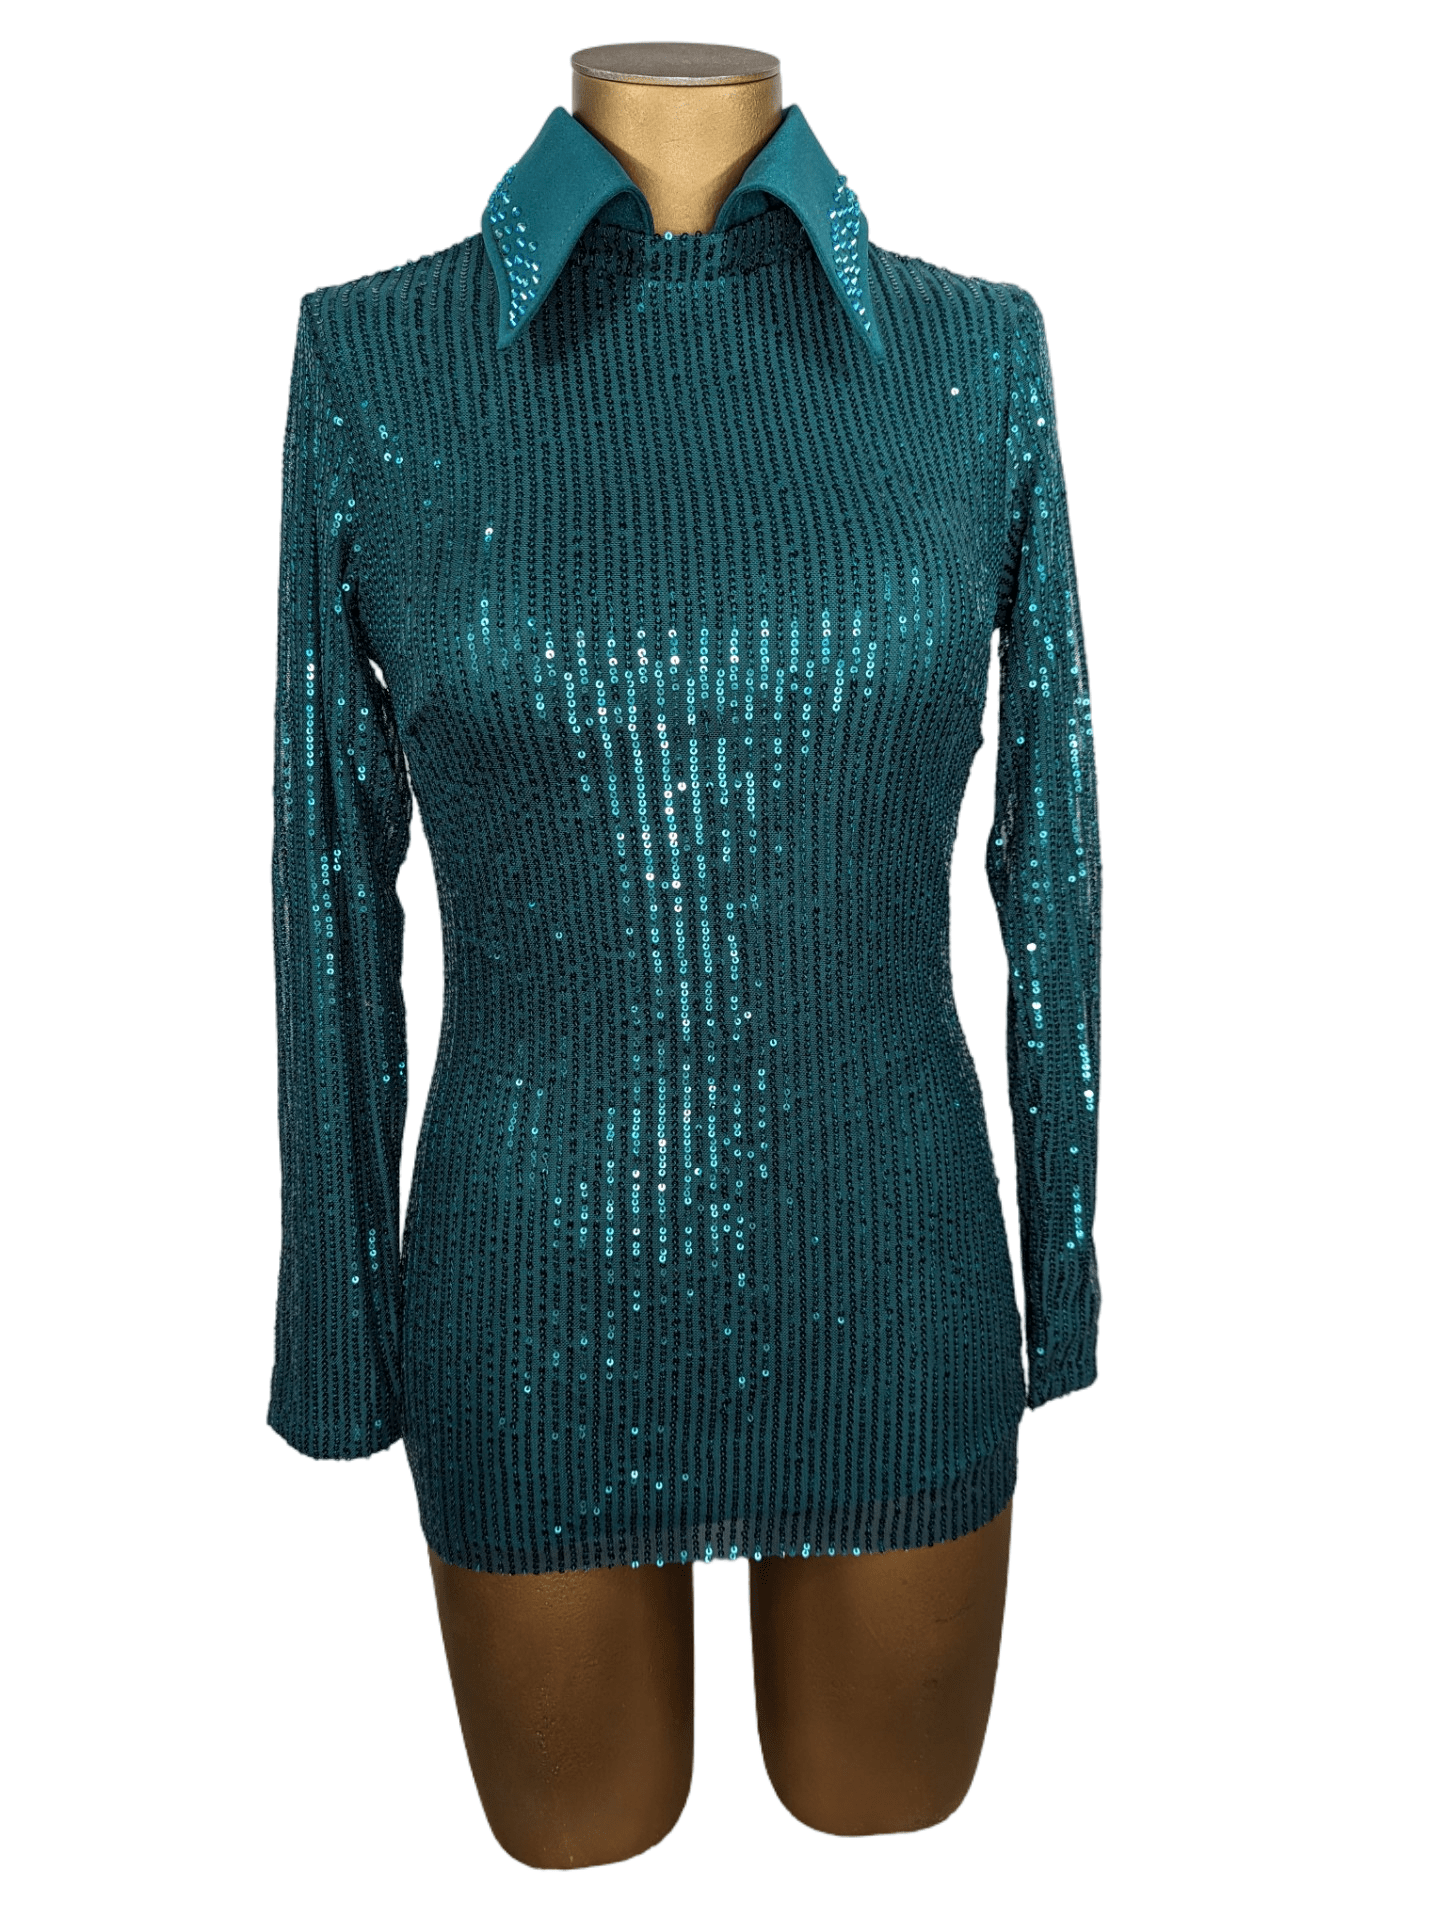 sparkle-ridge-womens-western-wear-affordable-show-clothes-horse-shirts-with-bling-rodeo-bodysuit-dark-green-sequin-showstopper-front.png